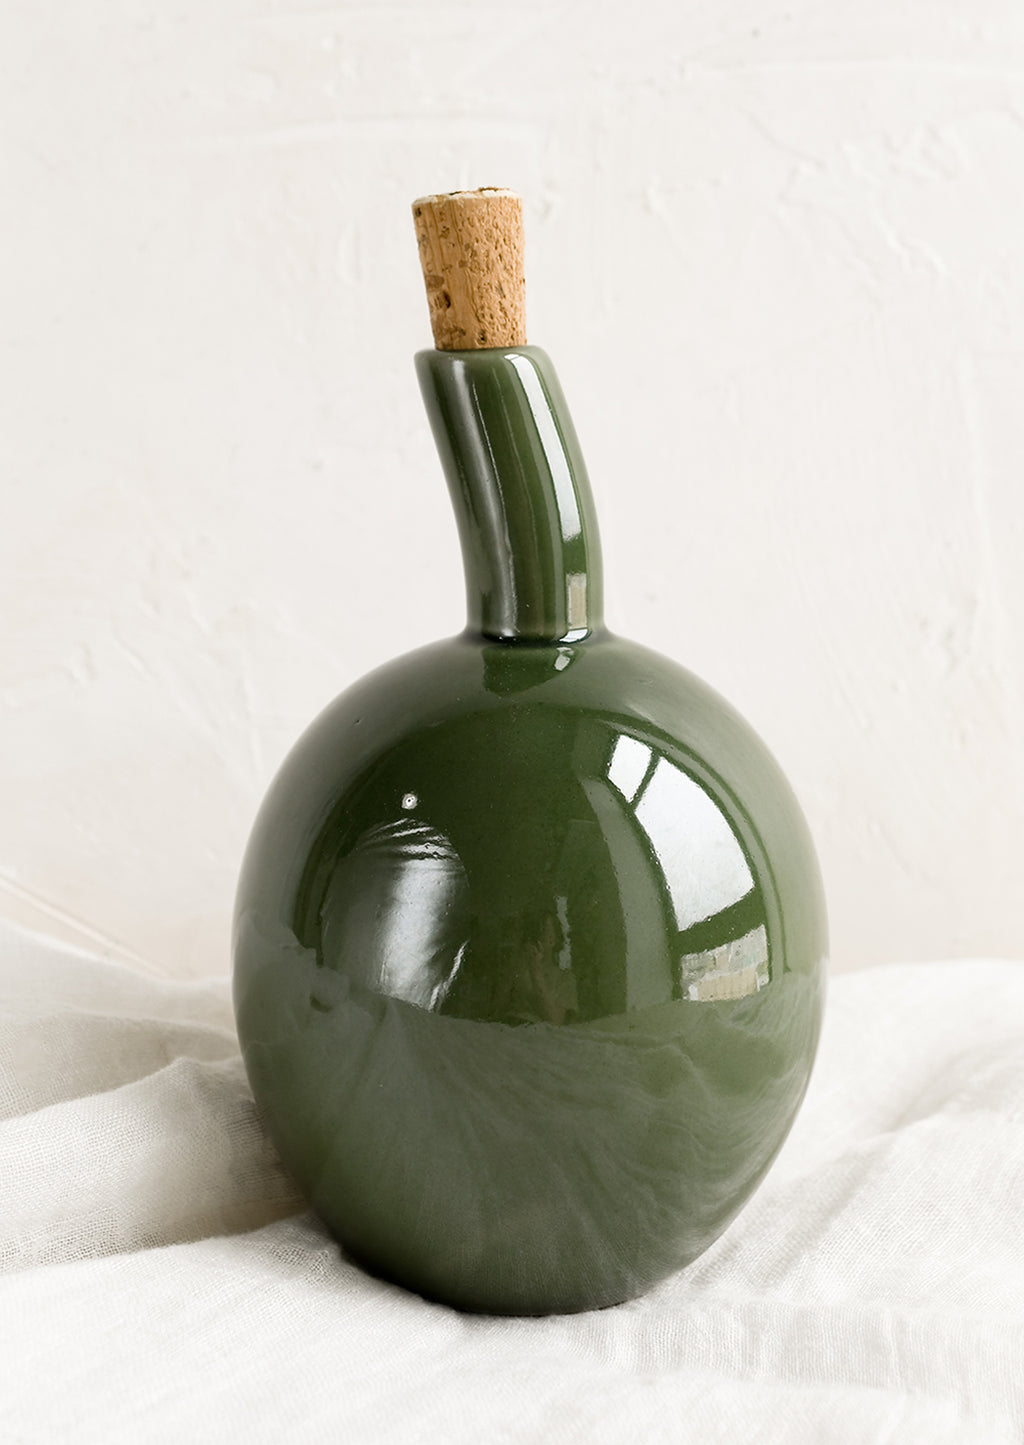 Olive Gloss: A glossy green ceramic cruet bottle with asymmetrical, bulbous silhouette.